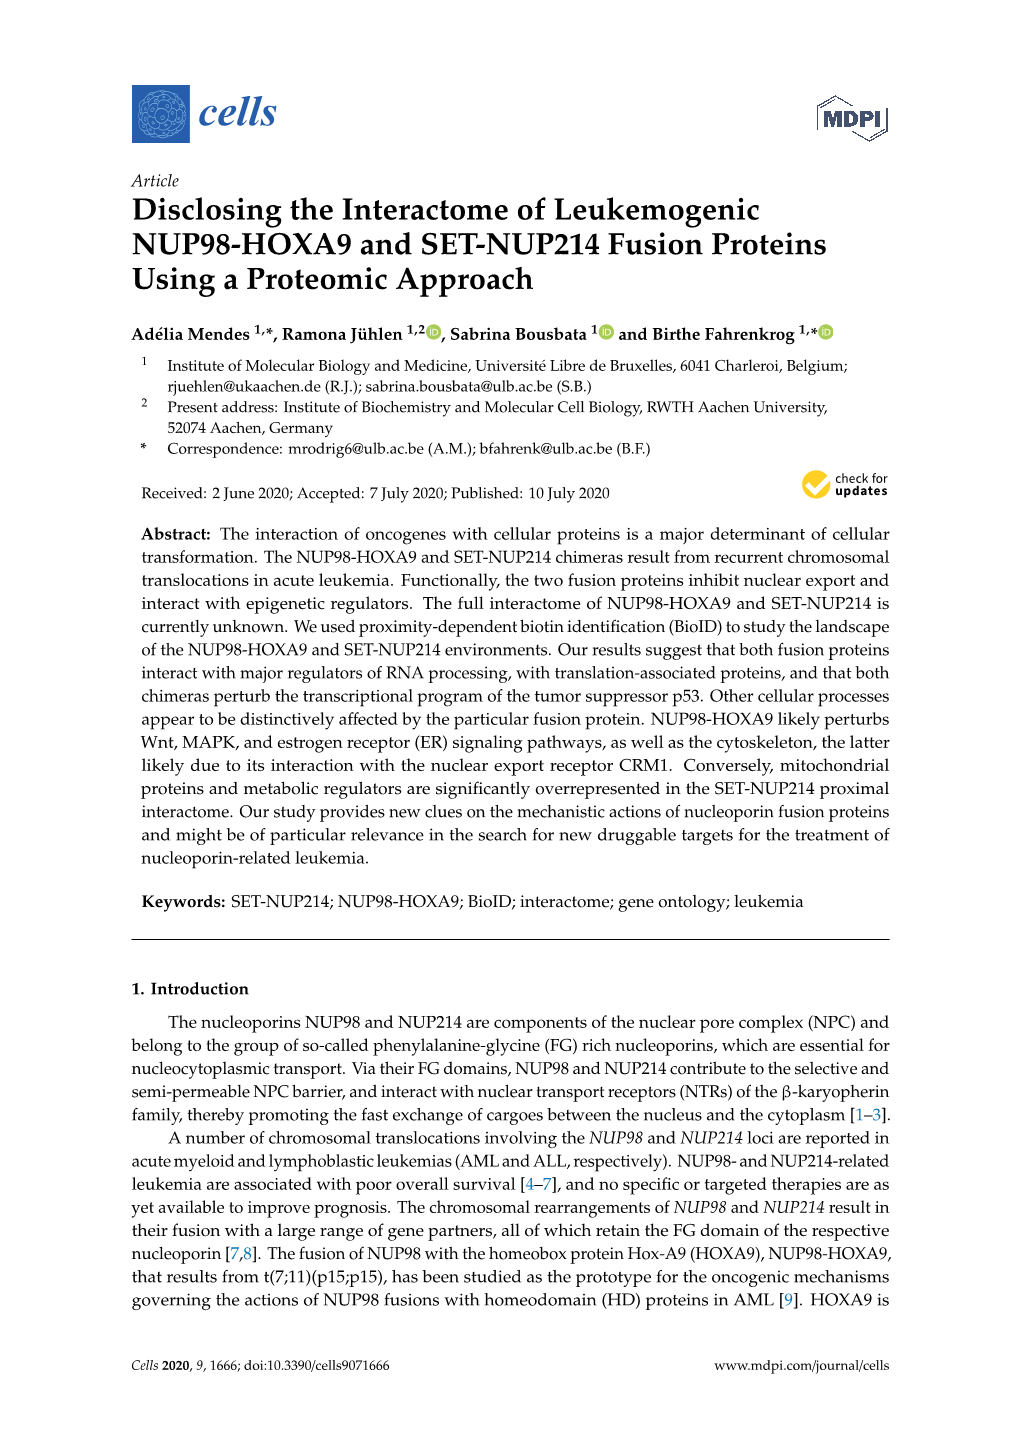 Disclosing the Interactome of Leukemogenic NUP98-HOXA9 and SET-NUP214 Fusion Proteins Using a Proteomic Approach